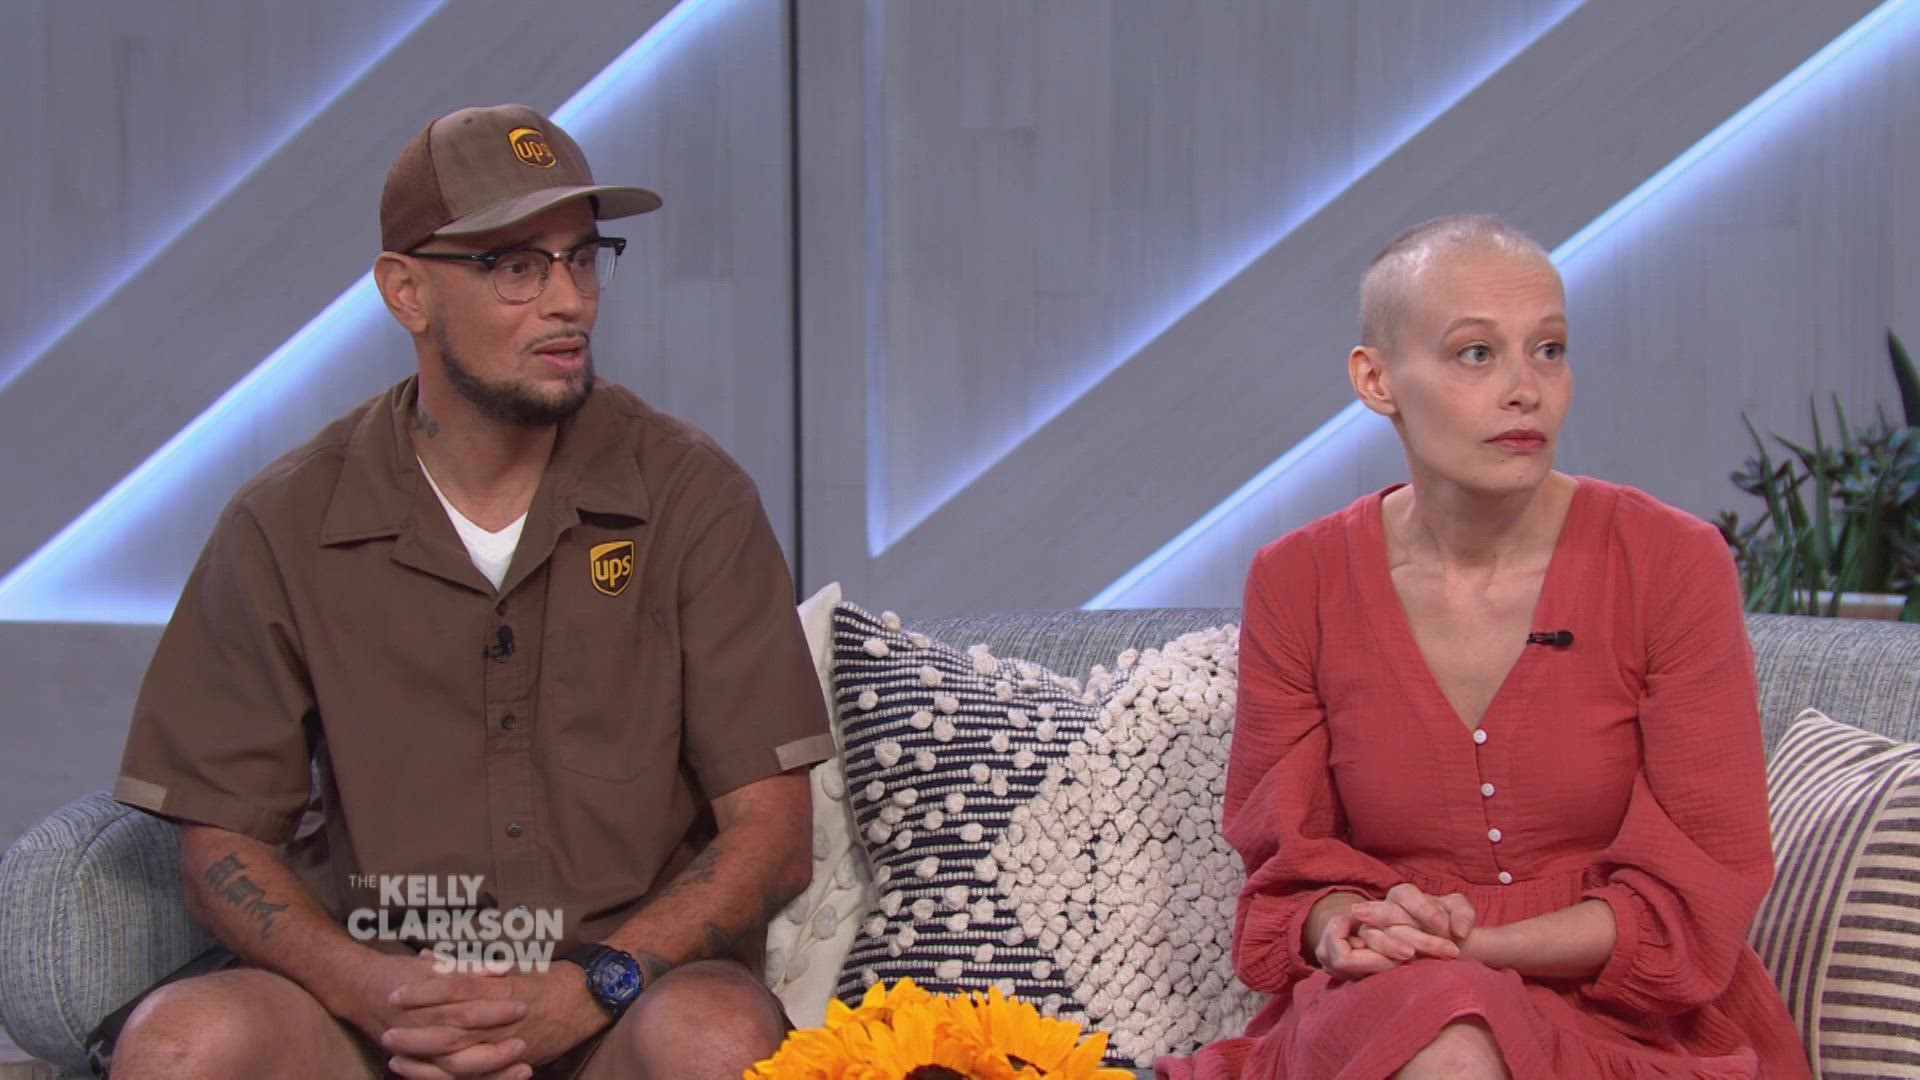 Al Rodriguez is a two-time cancer survivor and UPS driver who went out of his way to be there for an Indy native while she too battled cancer.